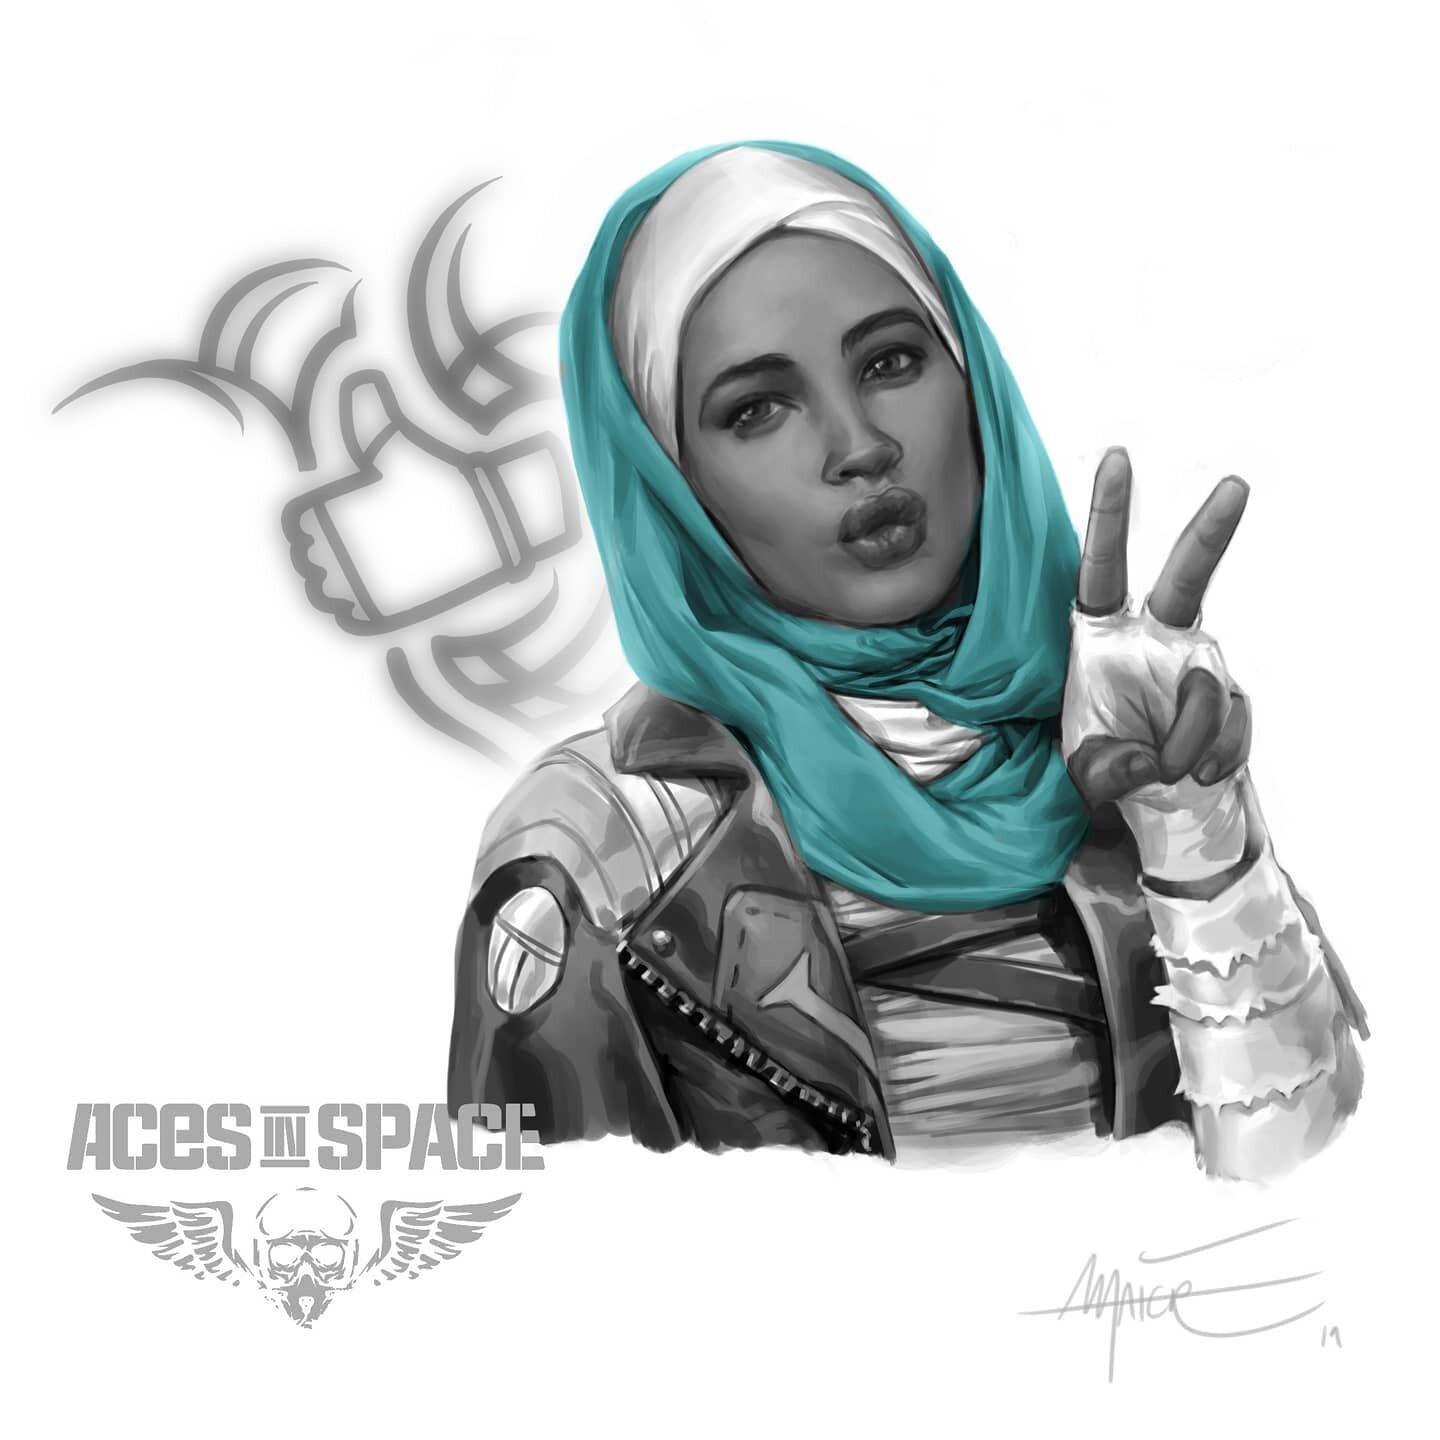 Influencer, #acesinspace, 2020⁠
⁠
More #art done for the Aces in Space #rpgsetting (#fate). Swipe for the #sketch. ⁠
⁠
#portrait #poc #powerfulwomen #rpgcharacterart #digitalart #artoninstagram #diversity #digitalillustration